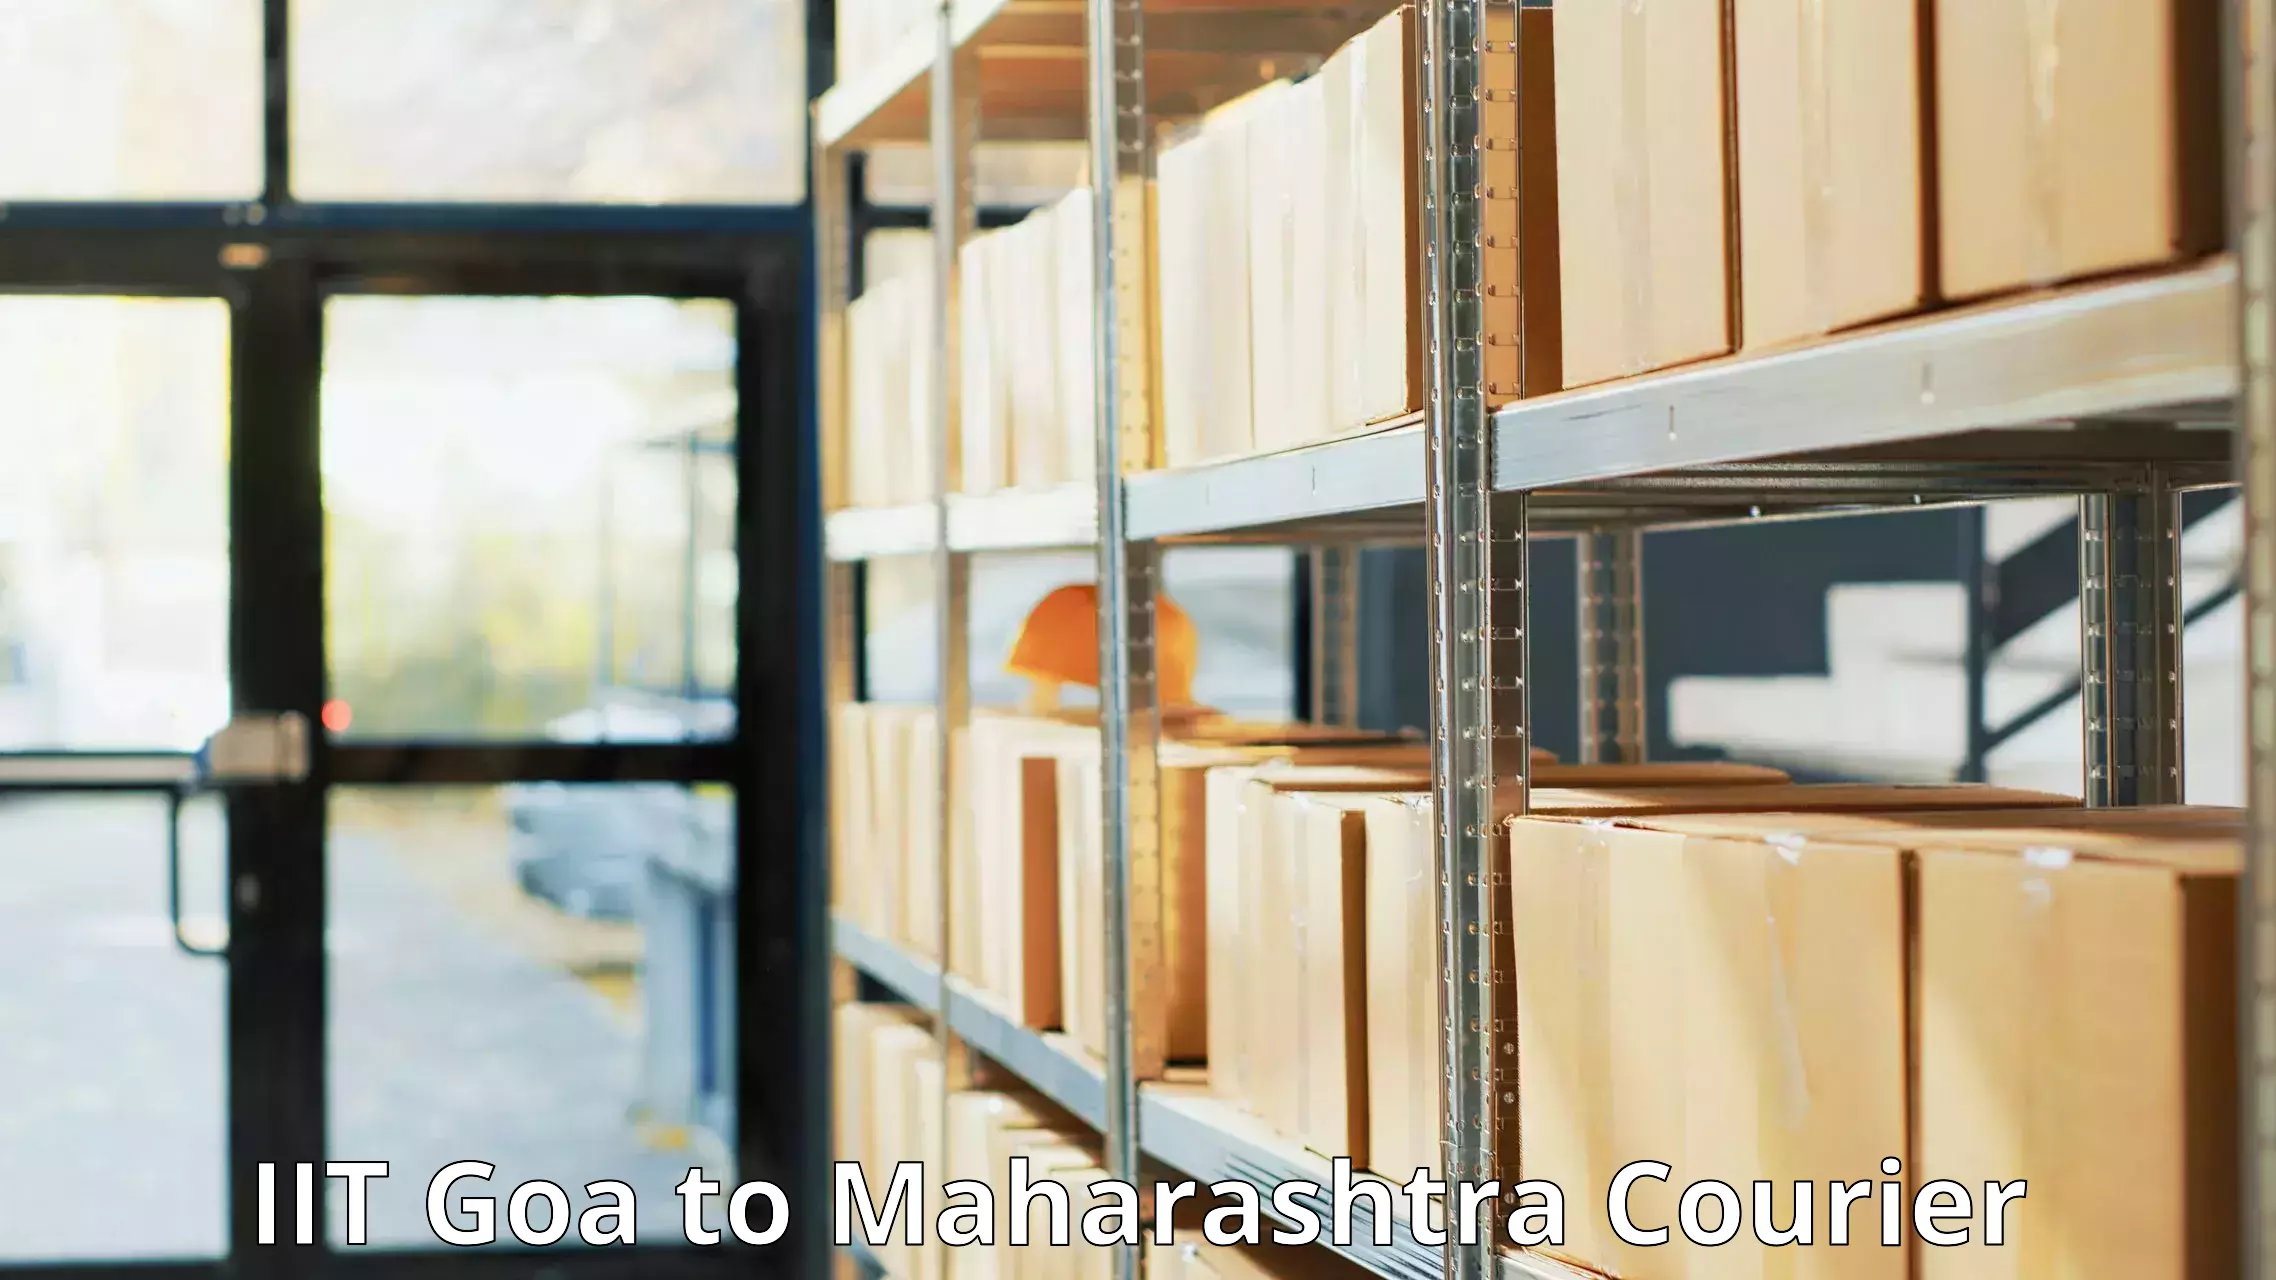 End-to-end delivery IIT Goa to Maharashtra